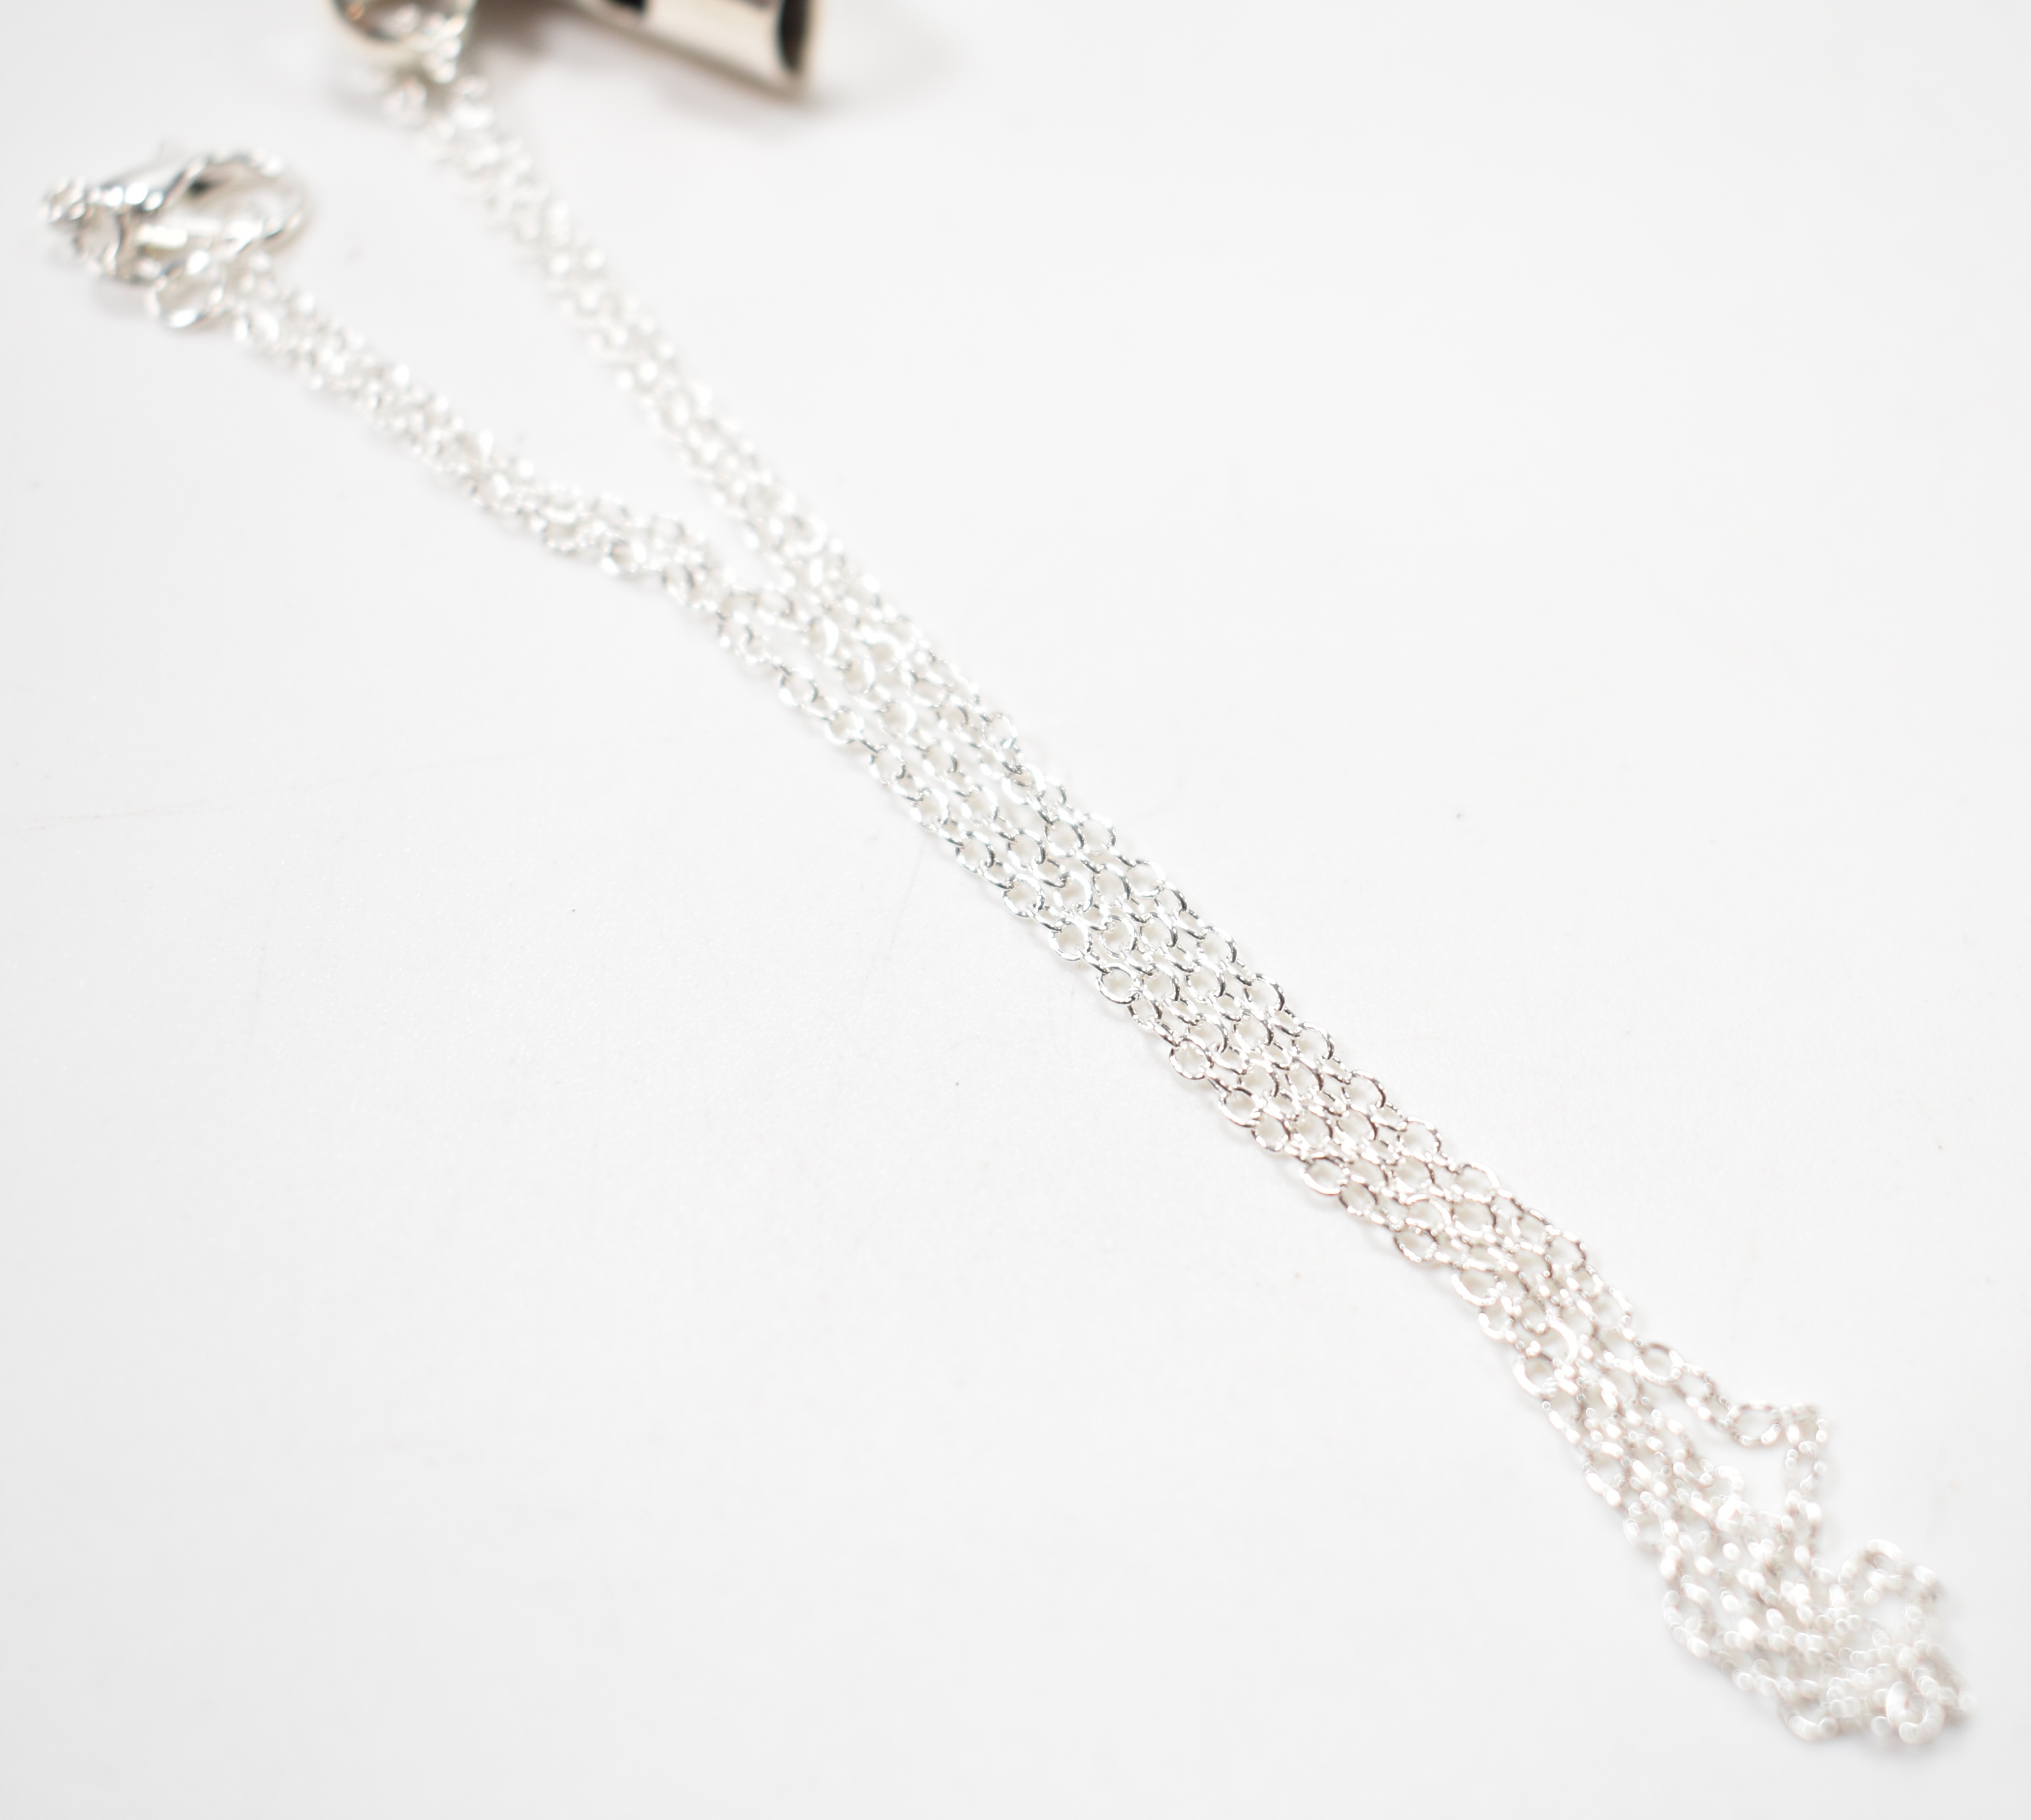 SILVER & RED STONE WHISTLE PENDANT NECKLACE - Image 5 of 5